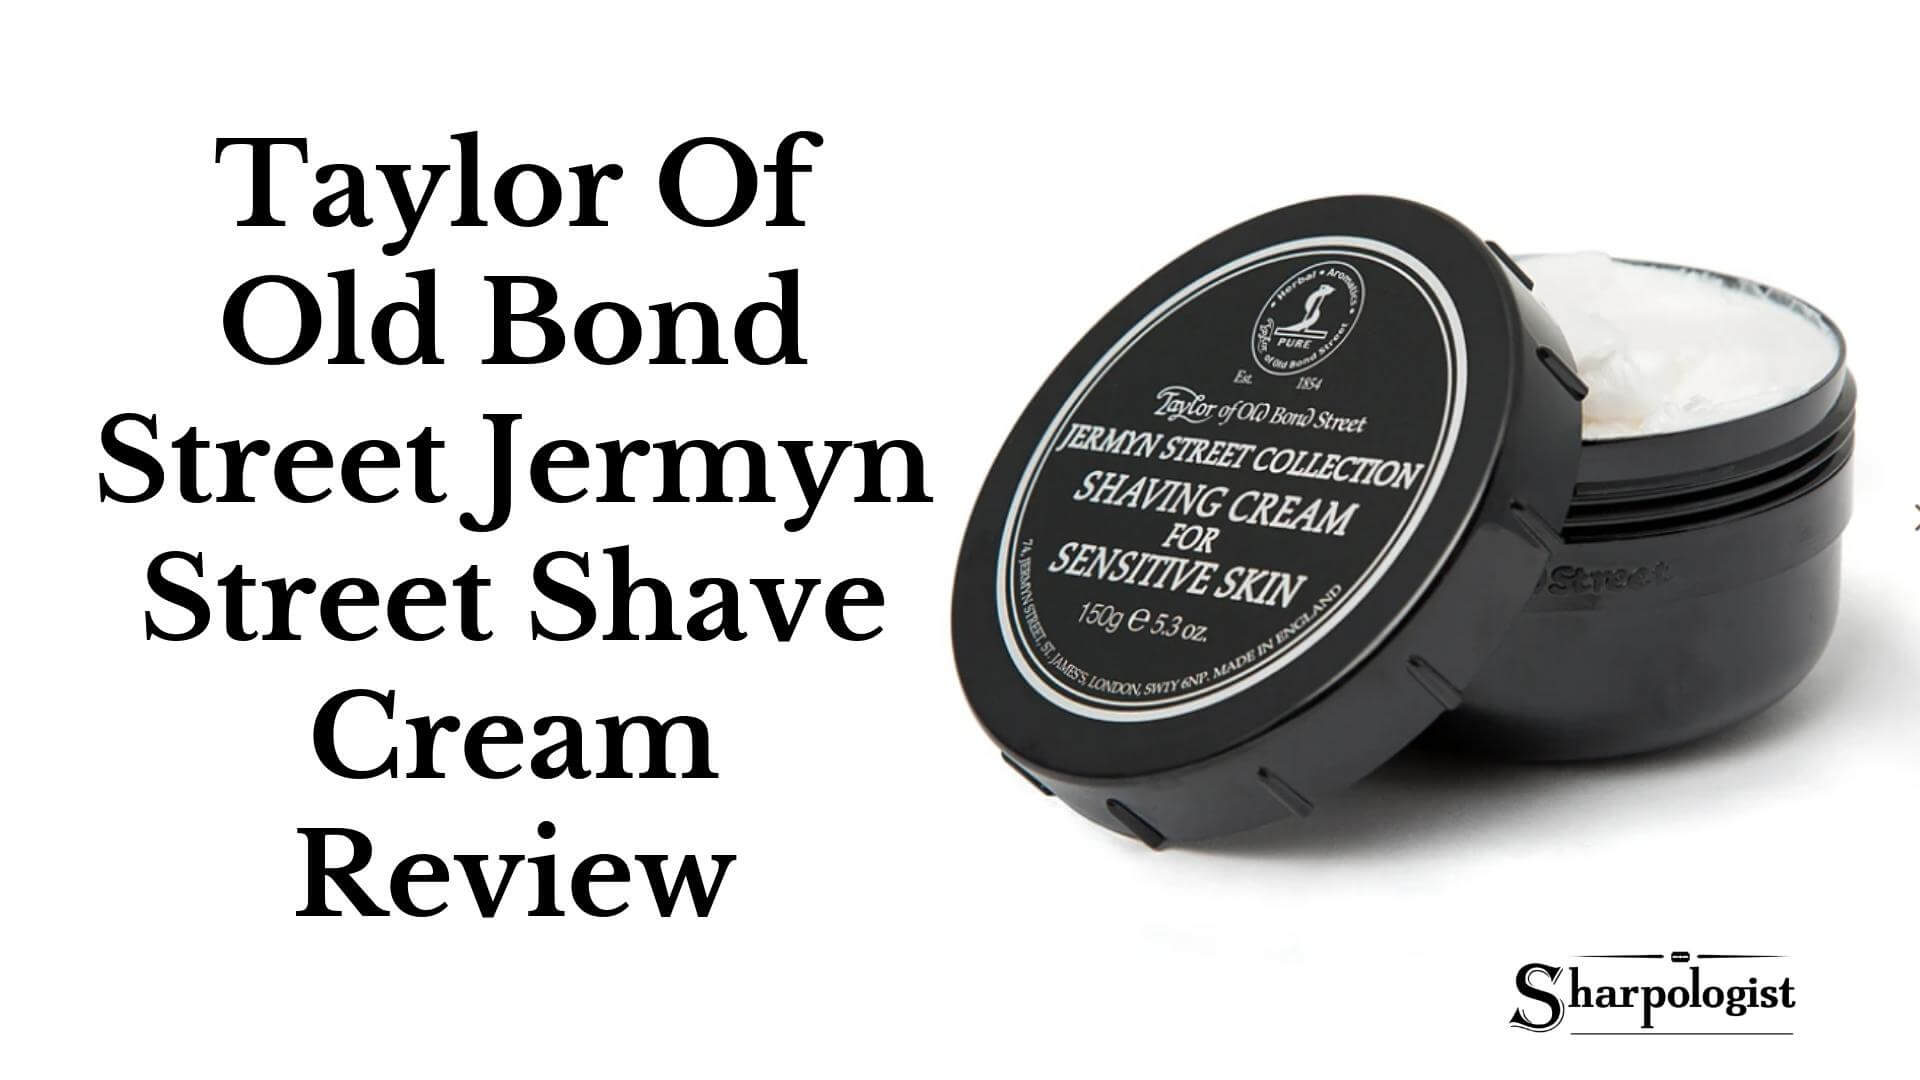 Shave Street Old Of Street Bond Taylor Review Jermyn Cream